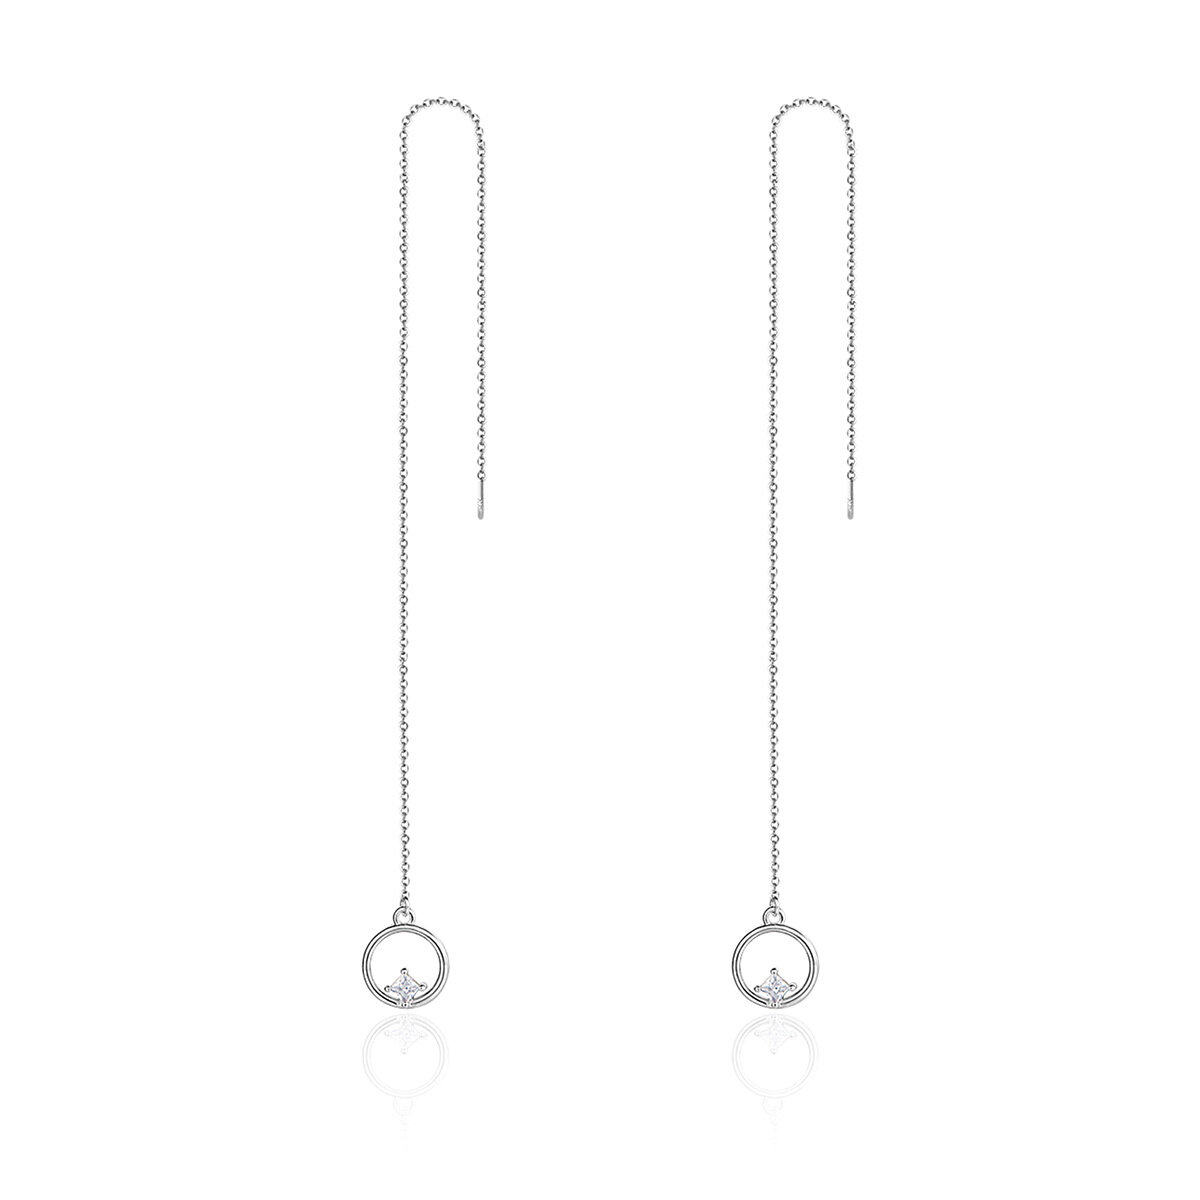 GemKing SCE080 Passionate Love S925 Sterling Silver Earring